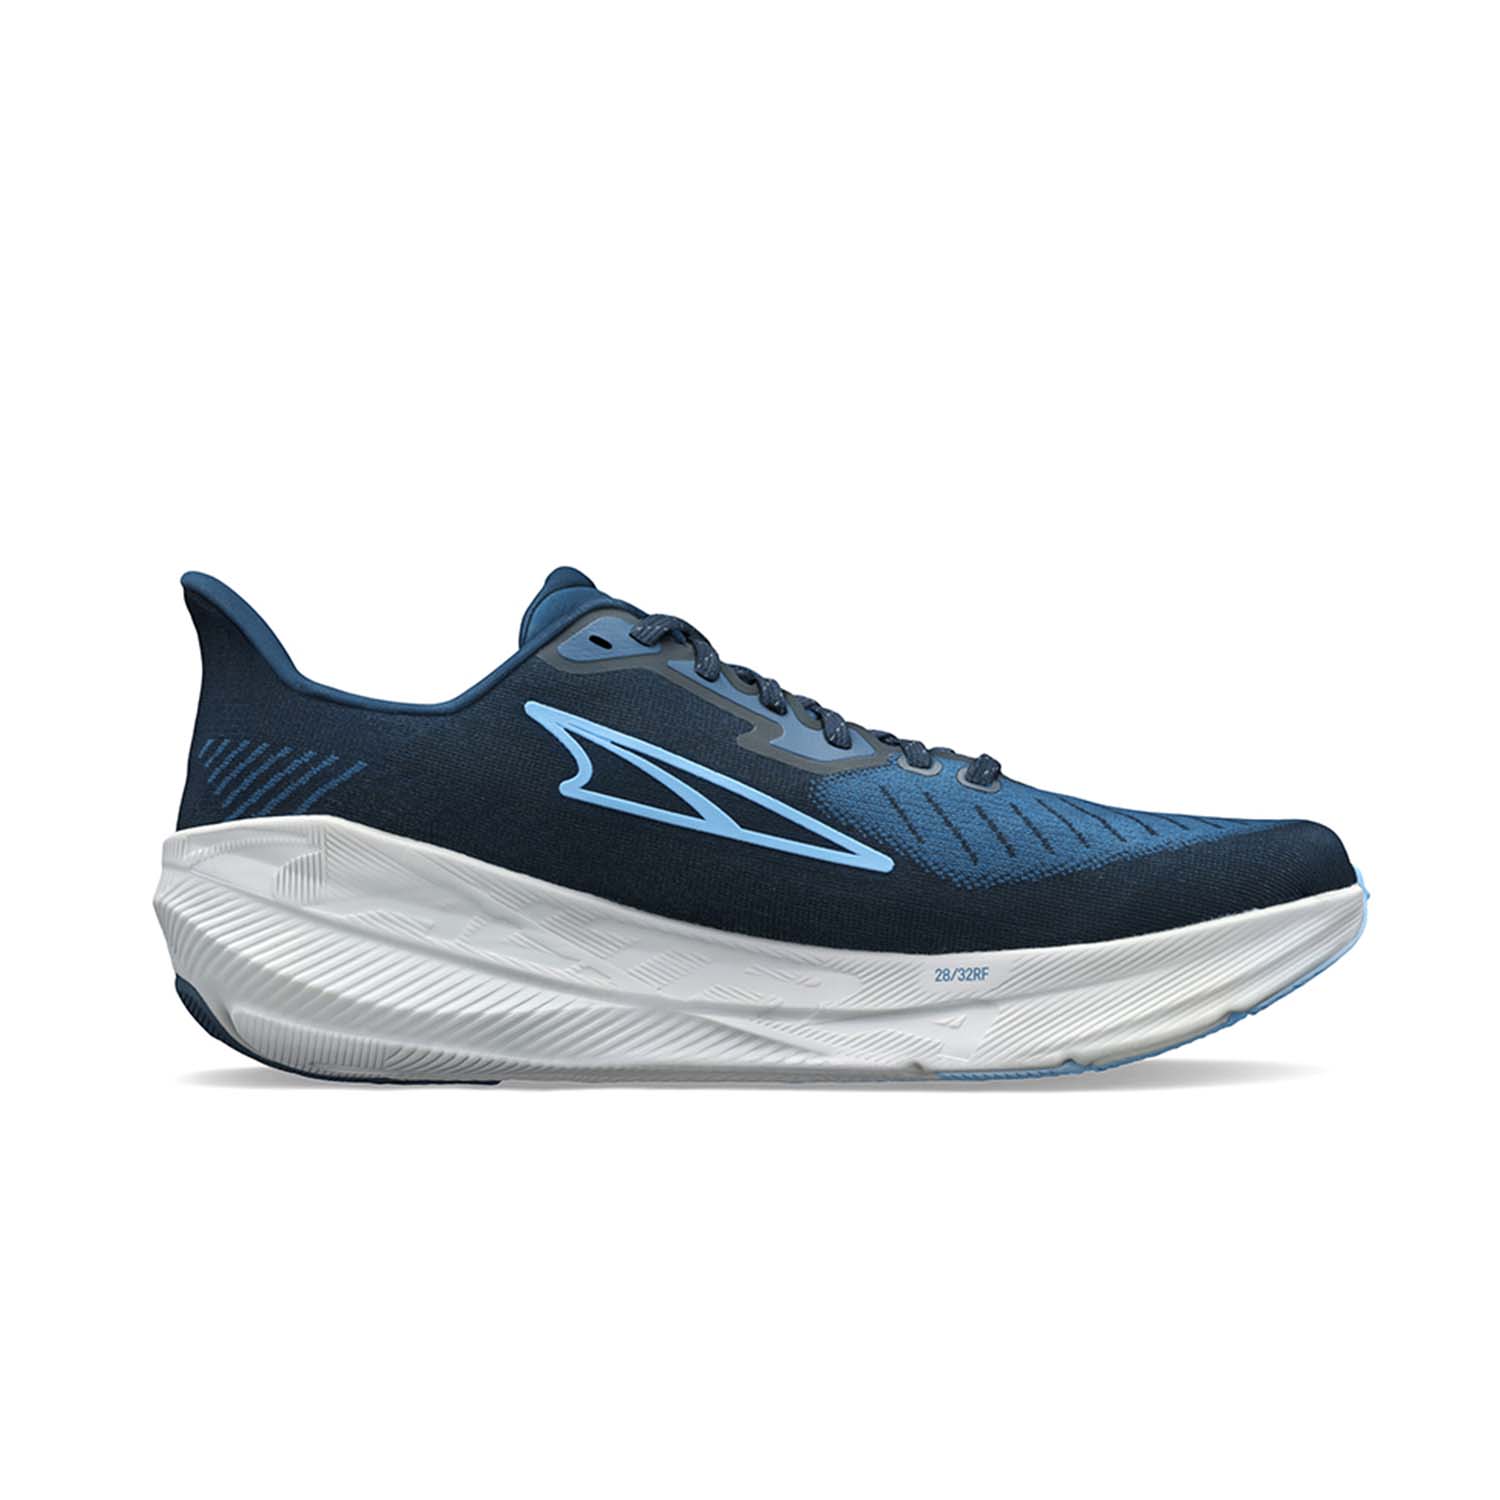 Altra Experience Flow - Blue